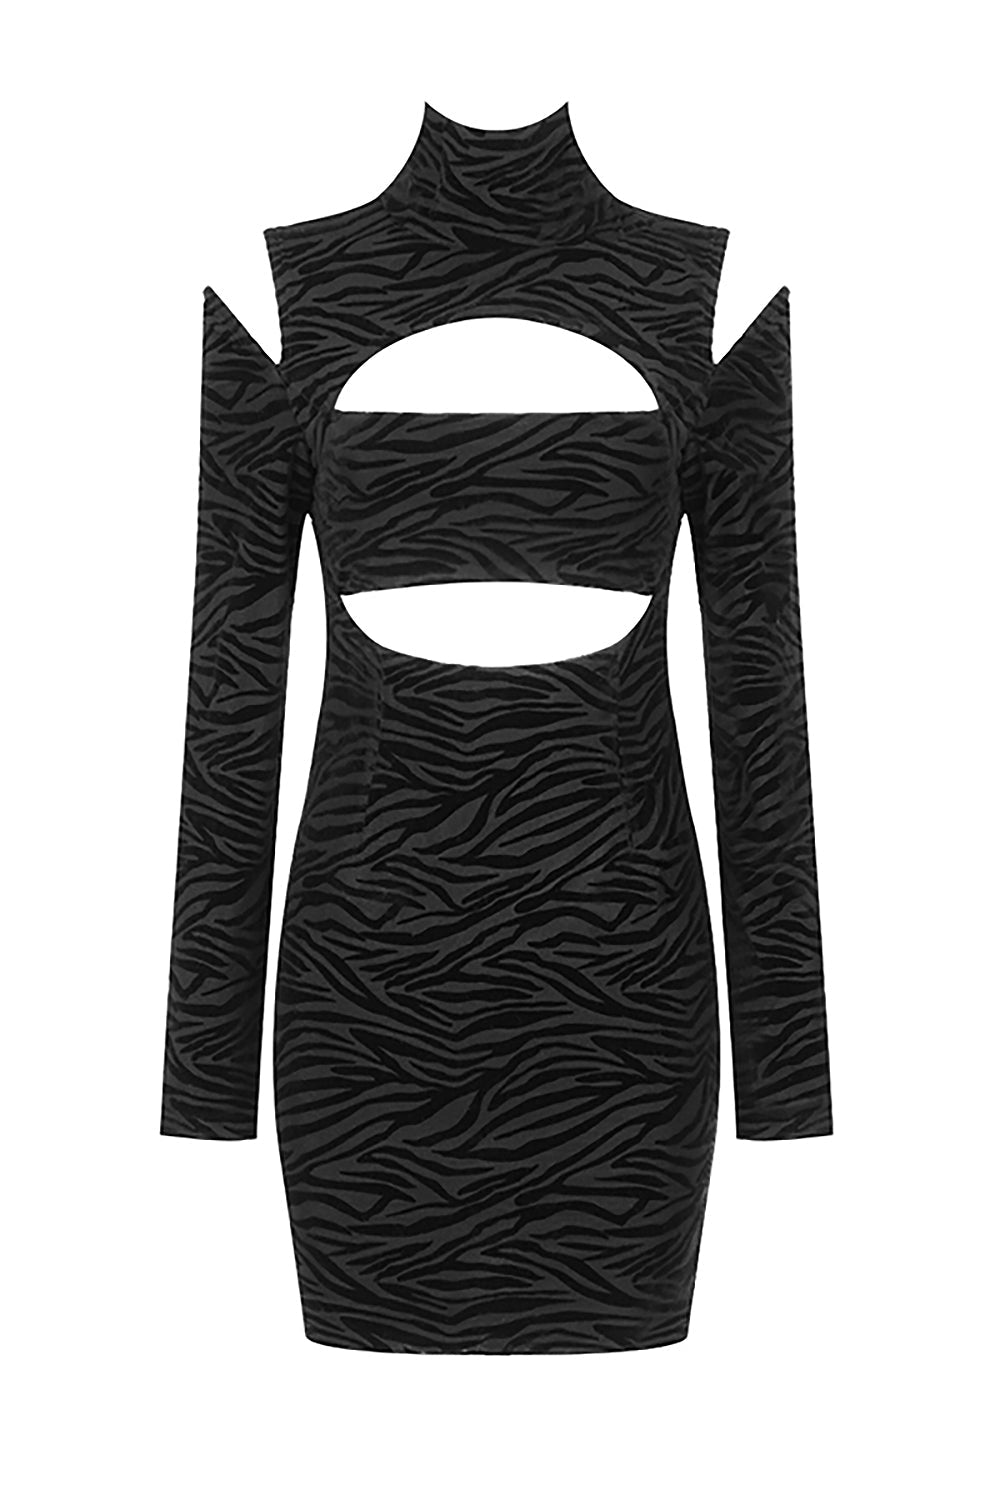 ZeBra Striped Turtle Neck Hollow Out Long Sleeves Dress